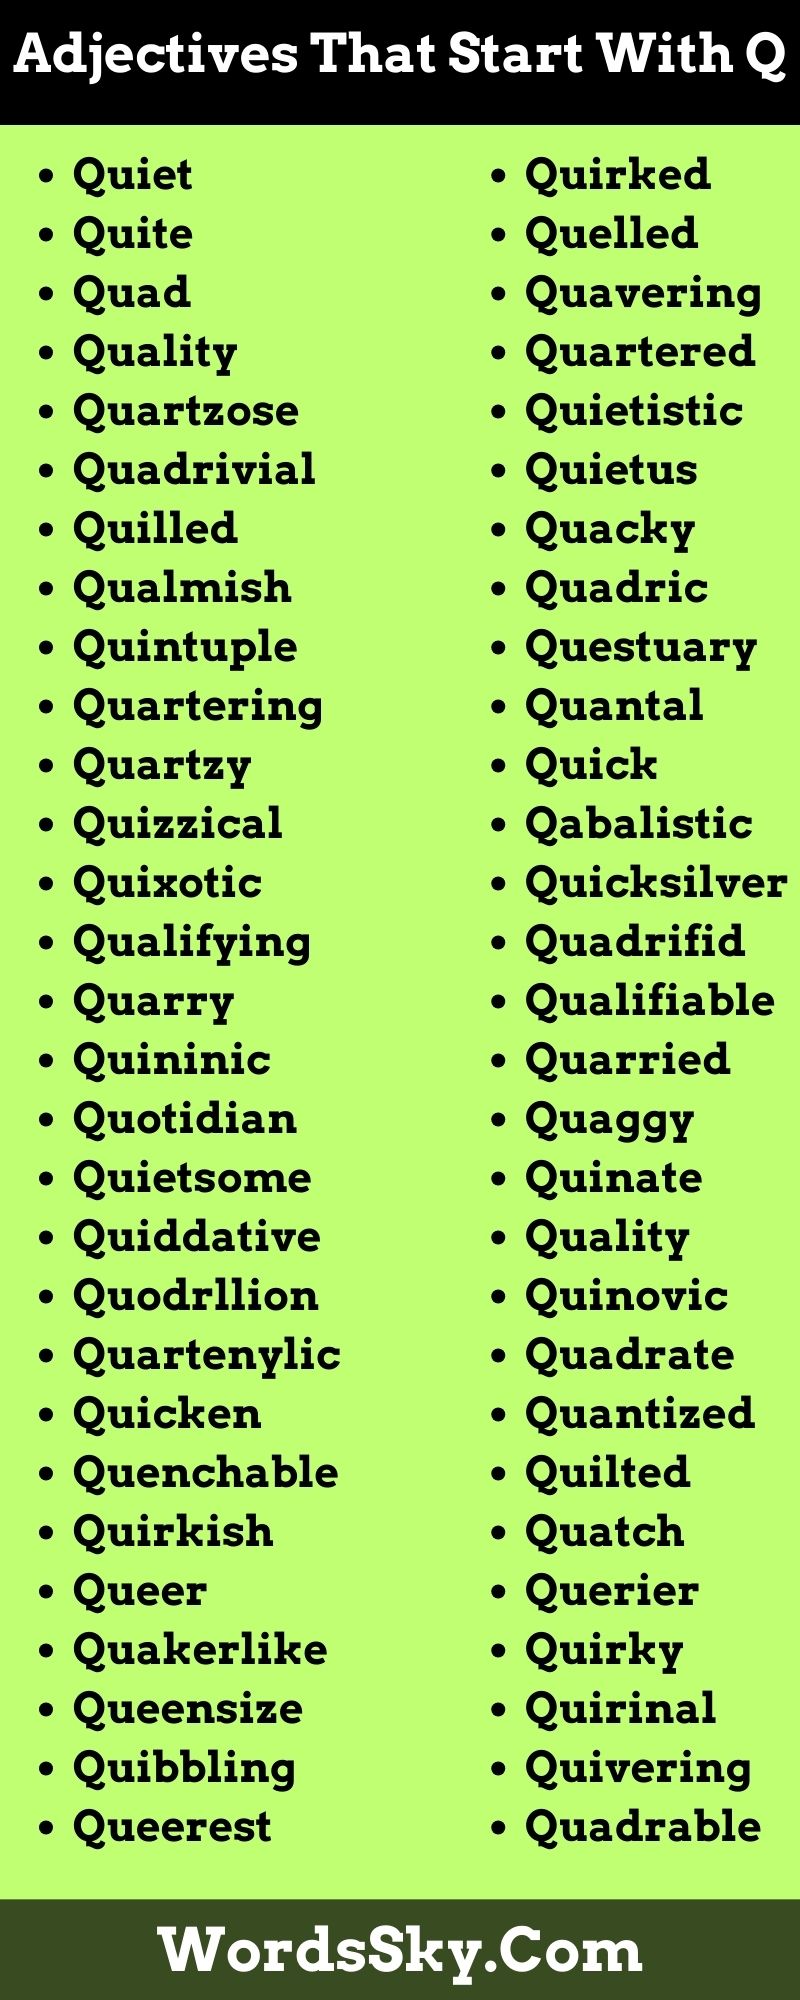 Adjectives That Start With Q